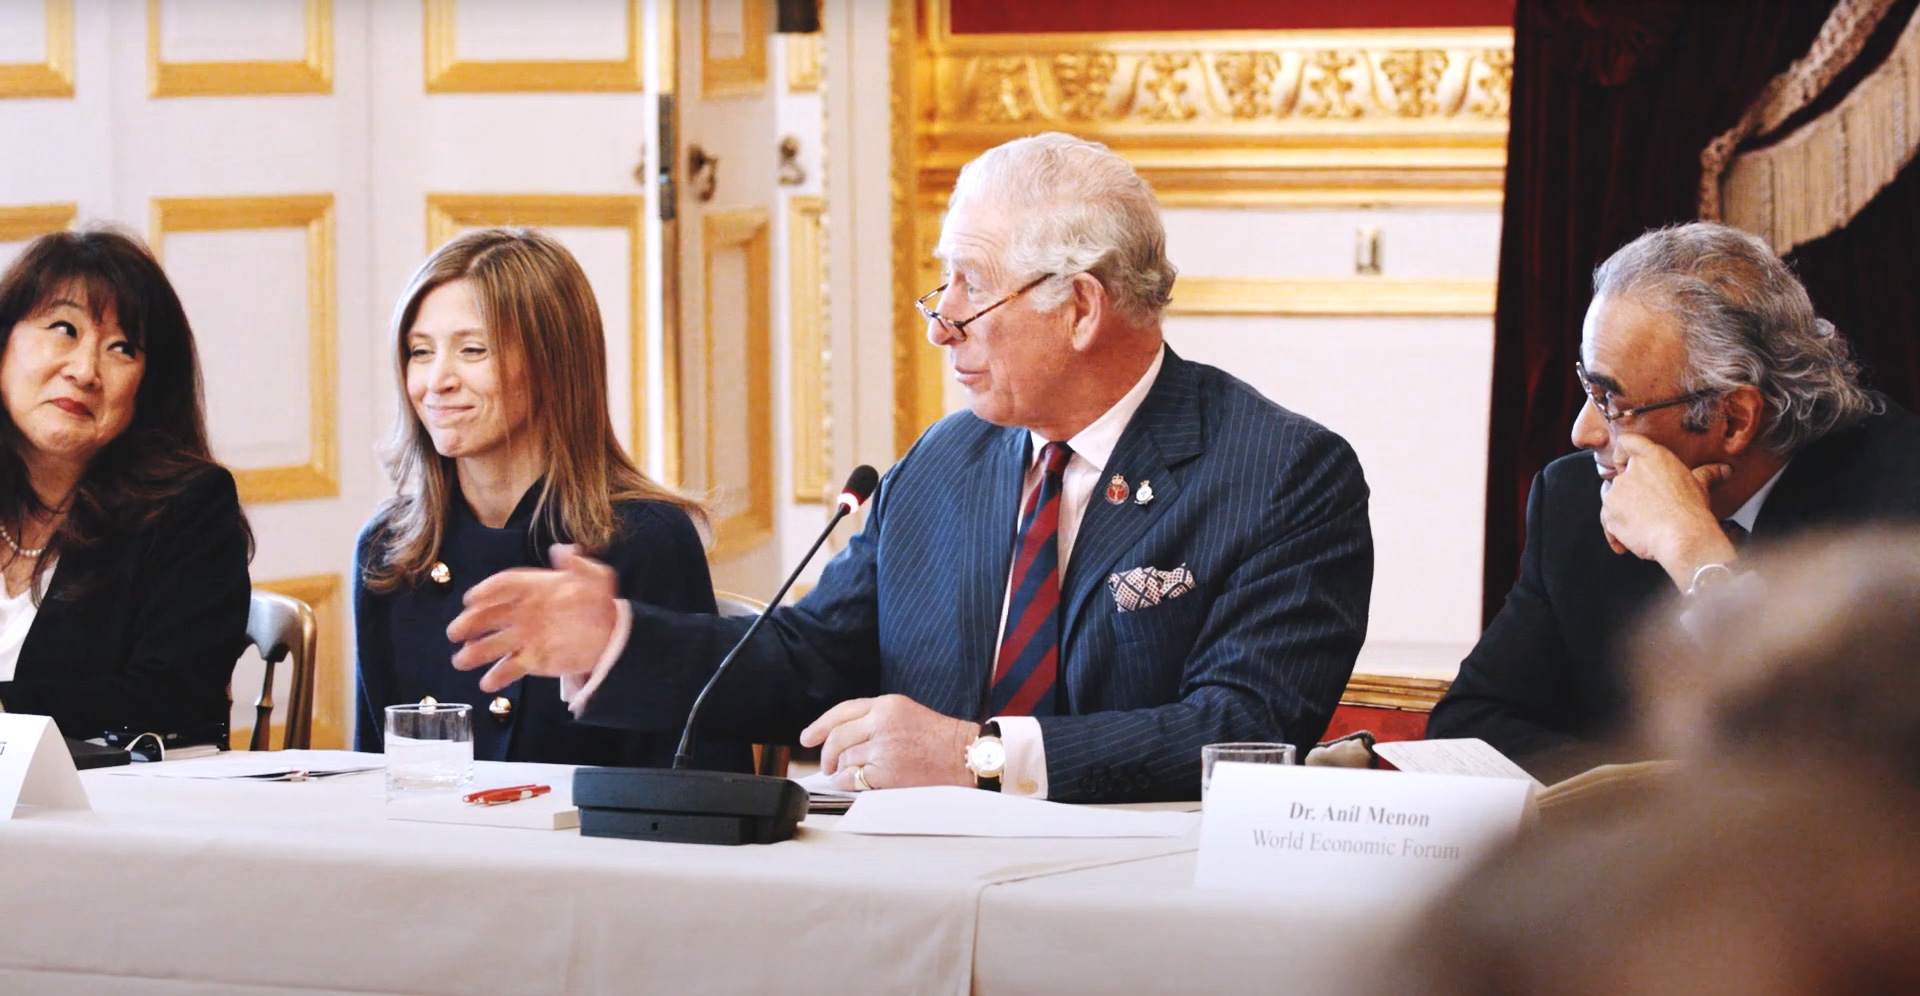 HRH convening a roundtable meeting on aviation in Clarence House 